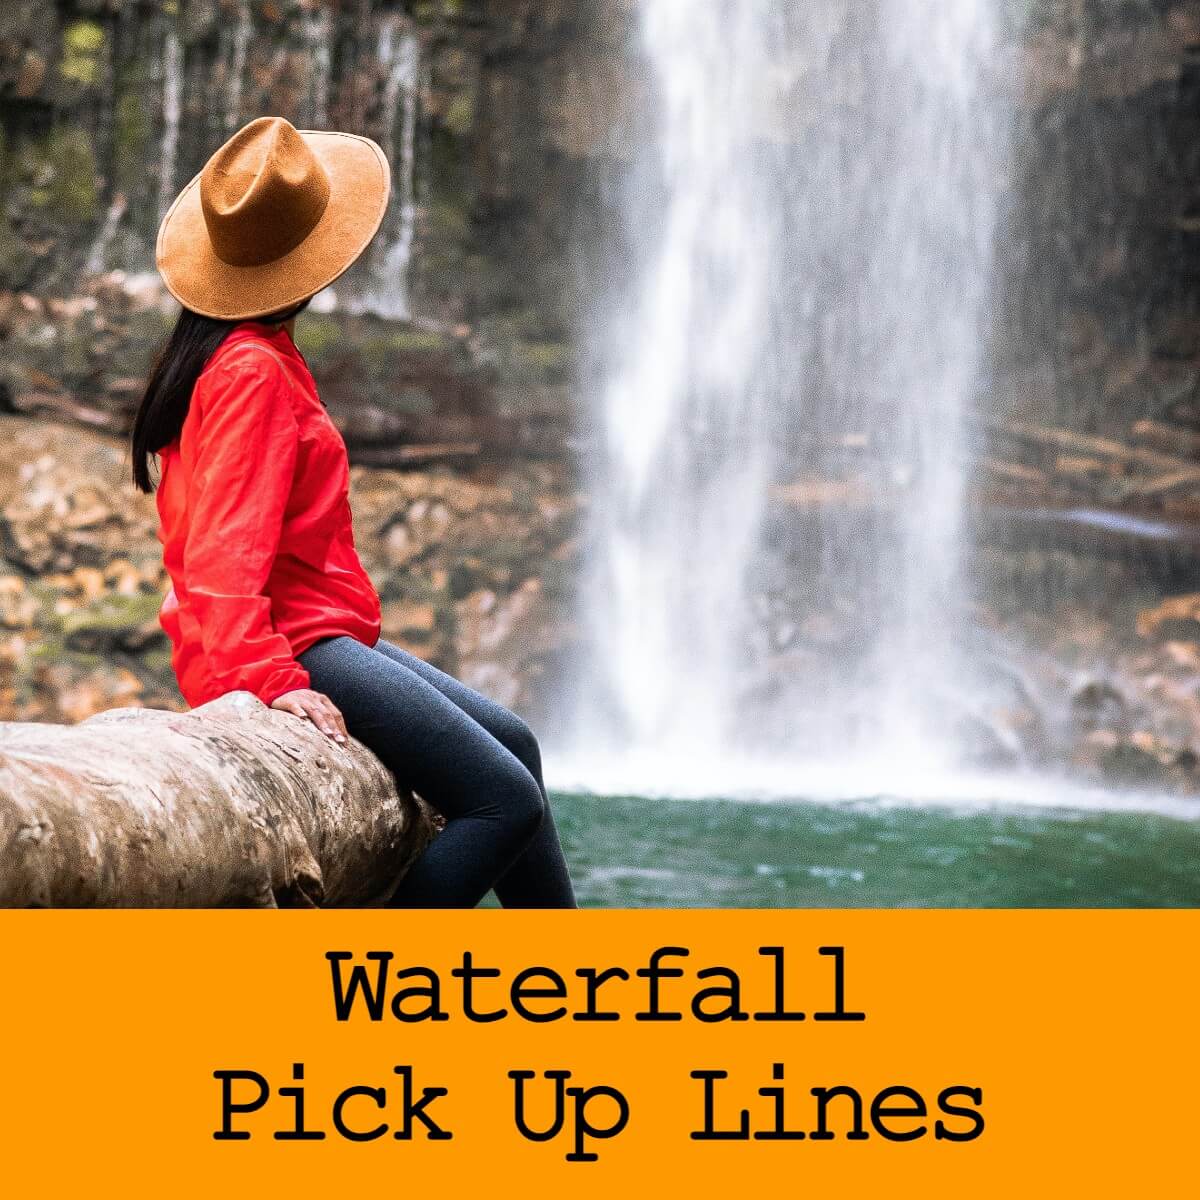 Pick Up Lines About Waterfalls